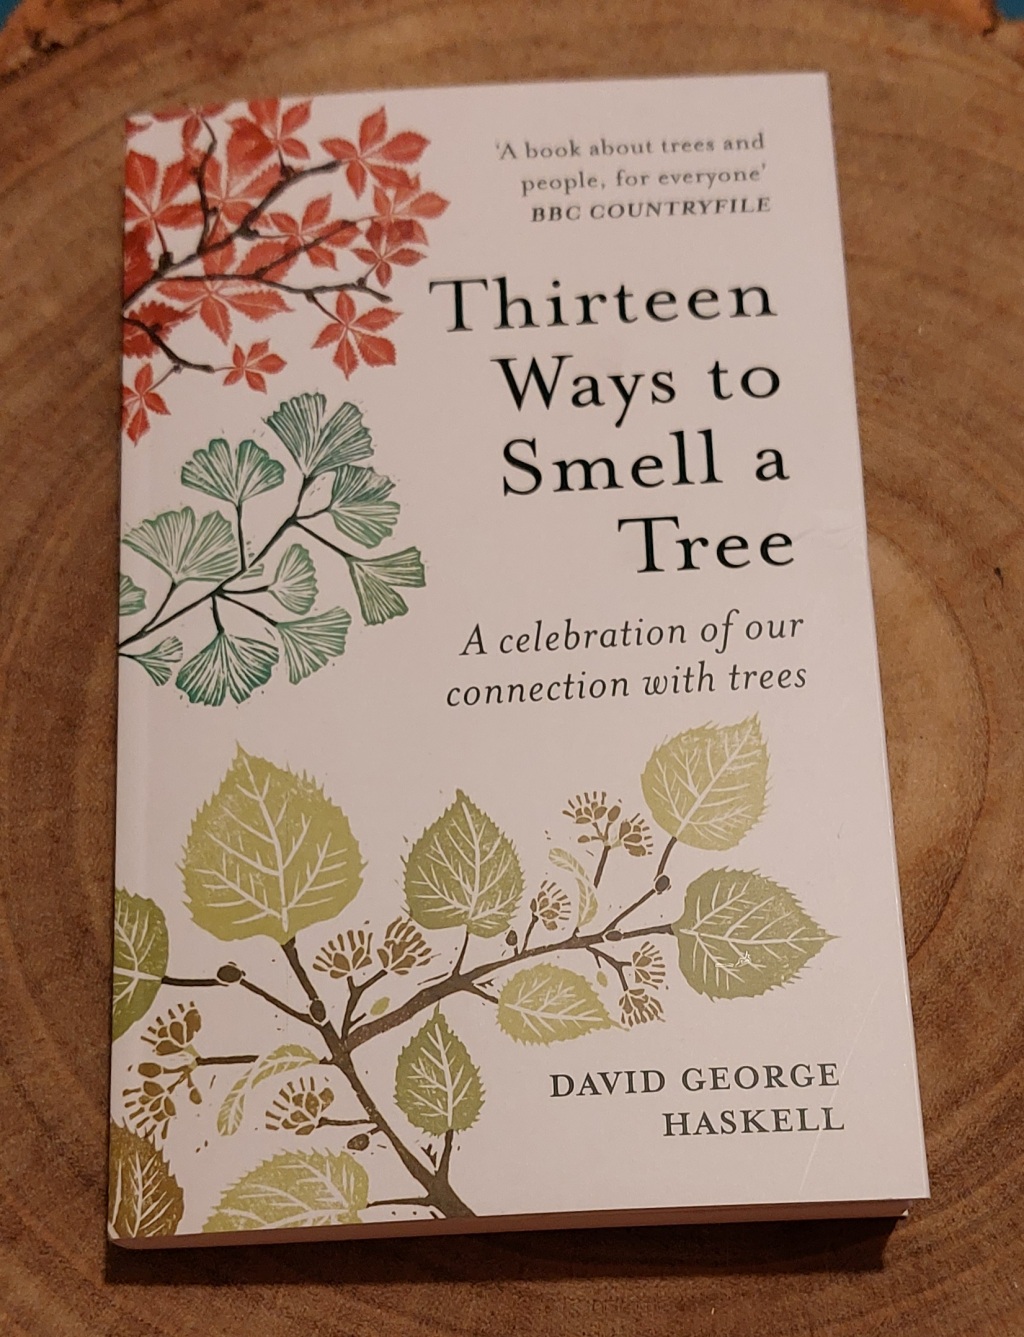 13 Ways to Smell a Tree by David George Haskell @Octopus_Books @RandomTTours @DavidGeorgeHaskell @DGHaskell #ThirteenWaysToSmellATree #AD #Gifted